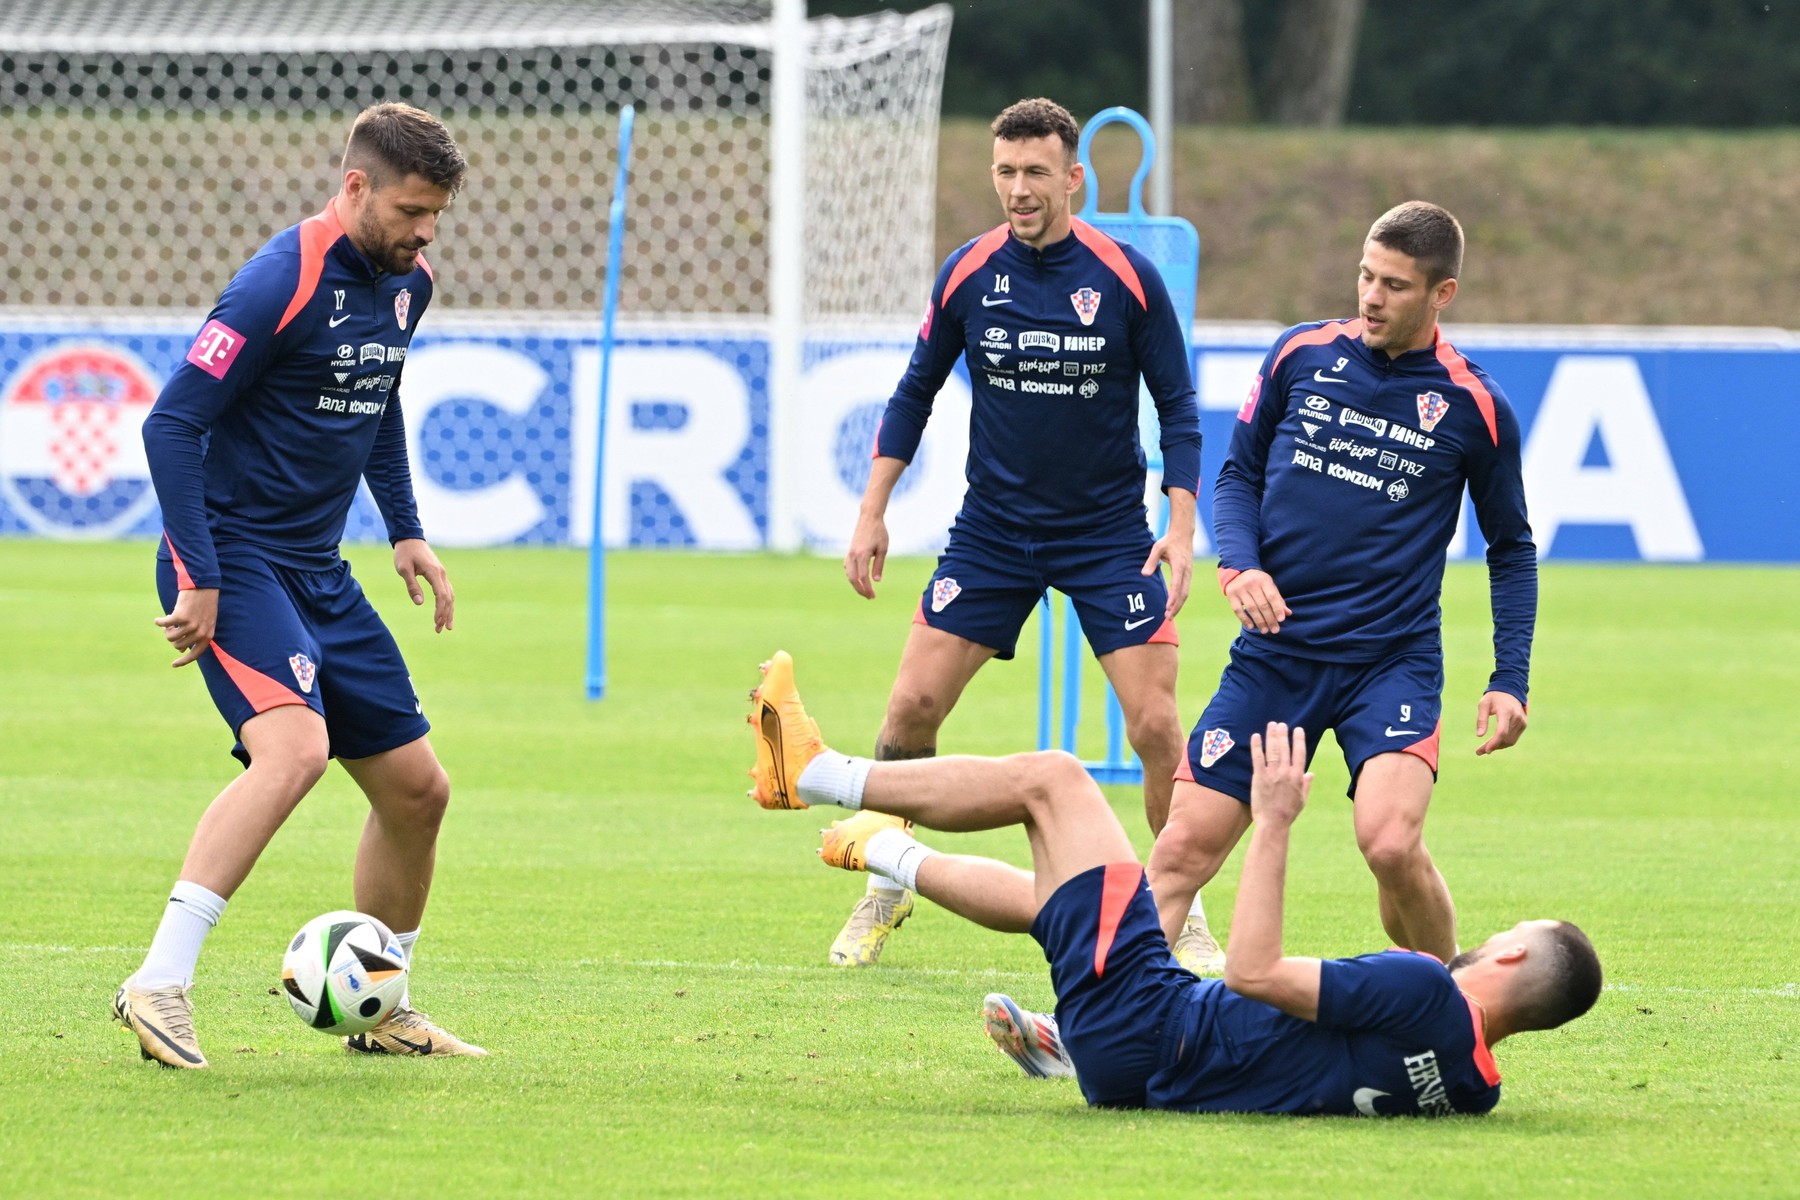 Neuruppin, Germany, 210624. Volksparkstadion. Training of the Croatian national football team before the European Championship, EM, Europameisterschaft match against Italy, the last in Group B, which will be played on Monday. In the photo: Bruno Petkovic, Ivan Perisic, Andrej Kramaric. Photo: / CROPIX Croatia Copyright: xxAntexCizmicx trening_hrvatska36-210624,Image: 883725187, License: Rights-managed, Restrictions: Credit images as "Profimedia/ IMAGO", Model Release: no, Credit line: Ante Cizmic / imago sportfotodienst / Profimedia